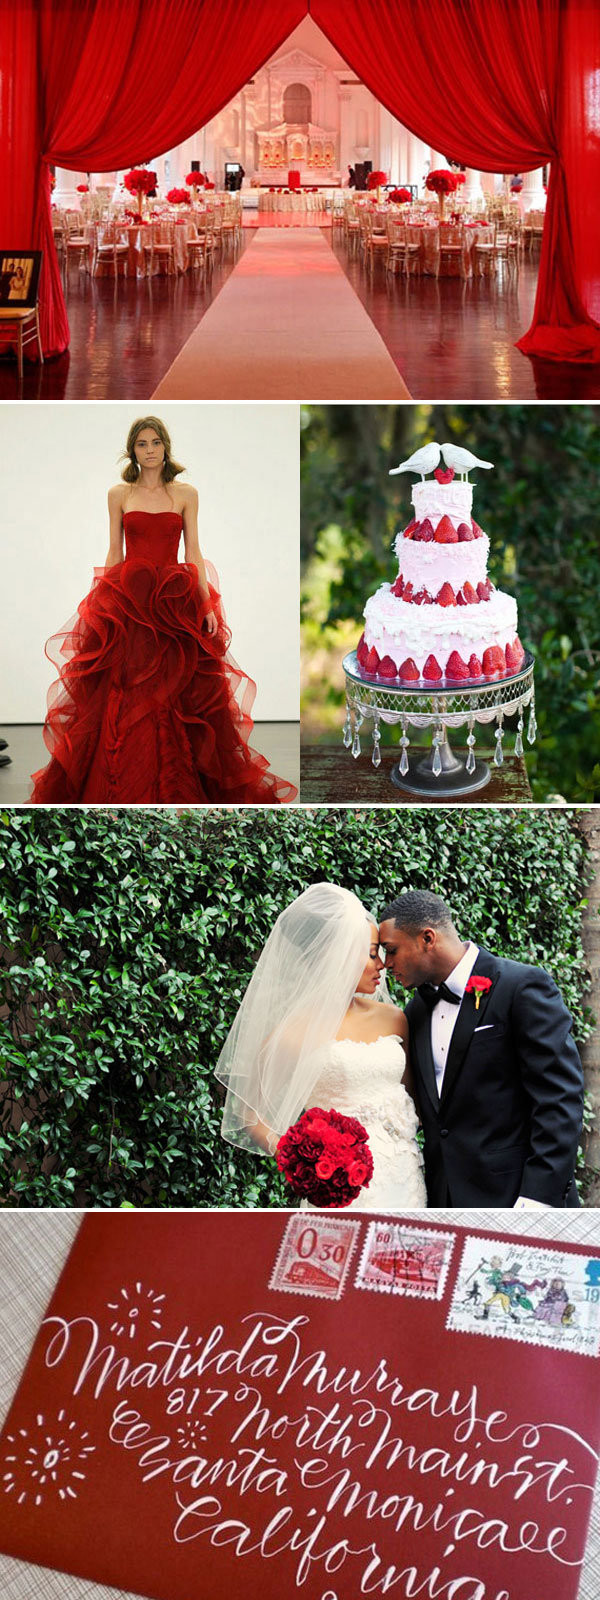 Red Wedding Theme Ideas
 What Your Wedding Color Says About Your Personality